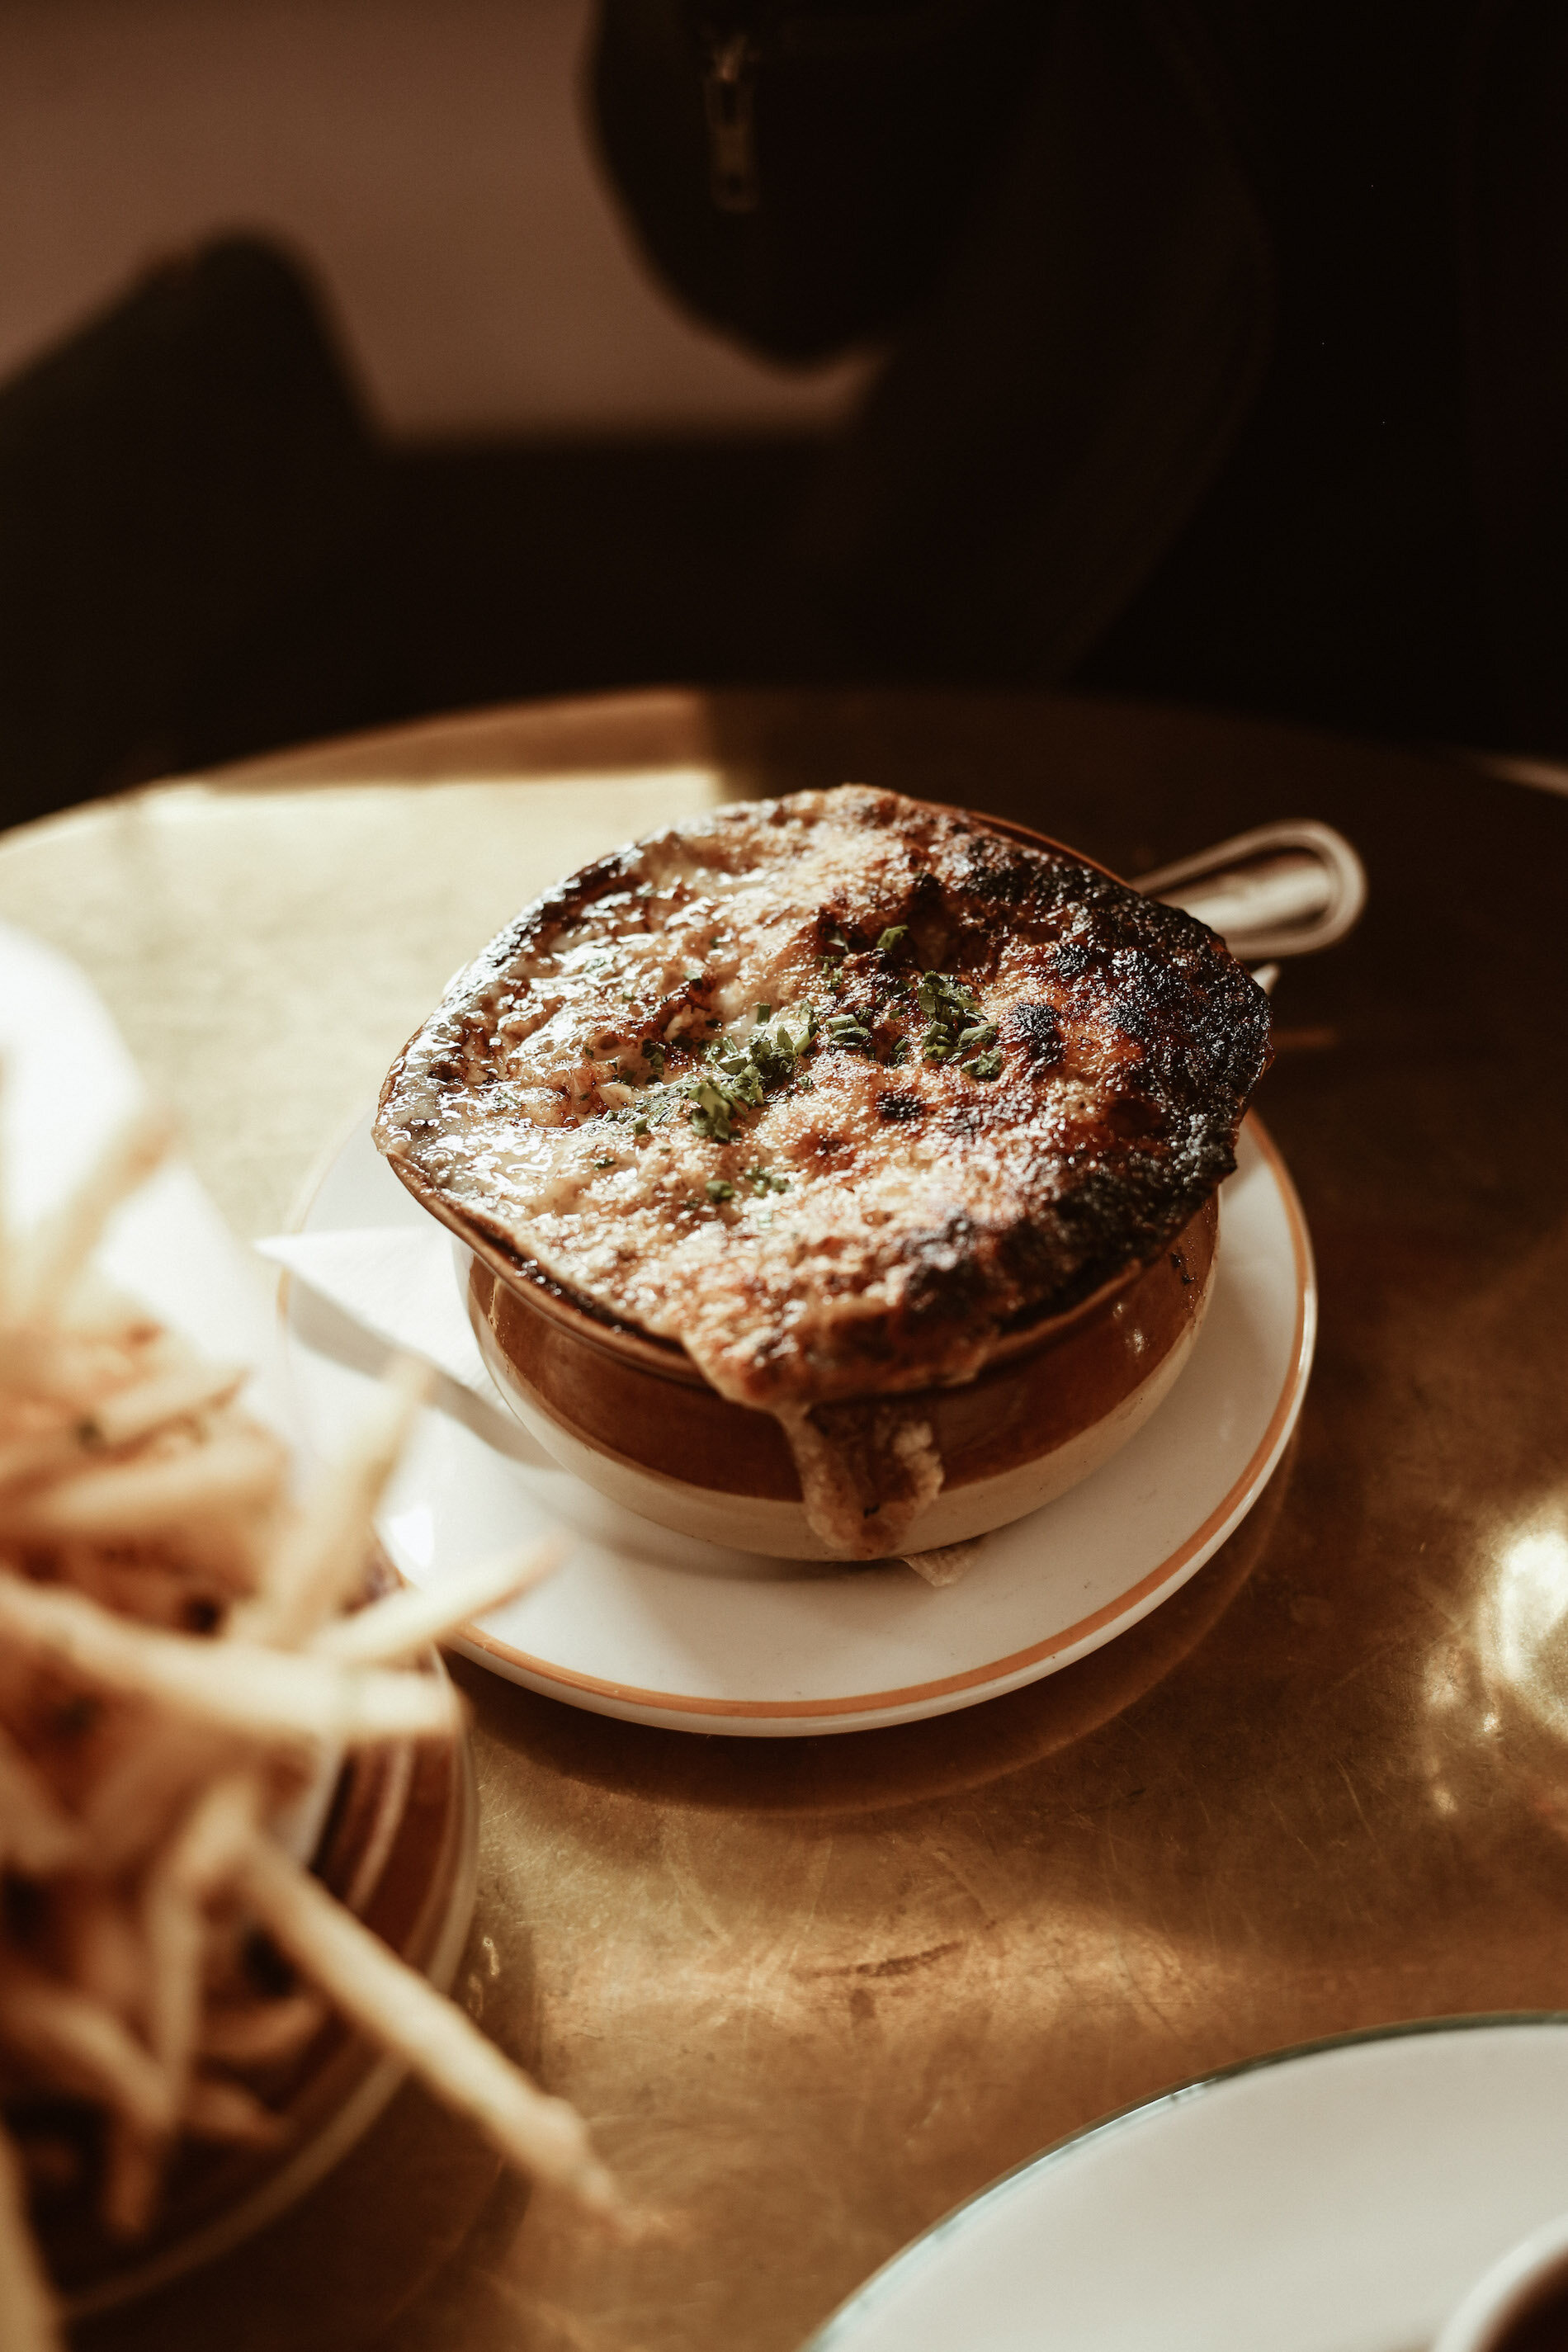 FRENCH ONION SOUP AT JUNE'S